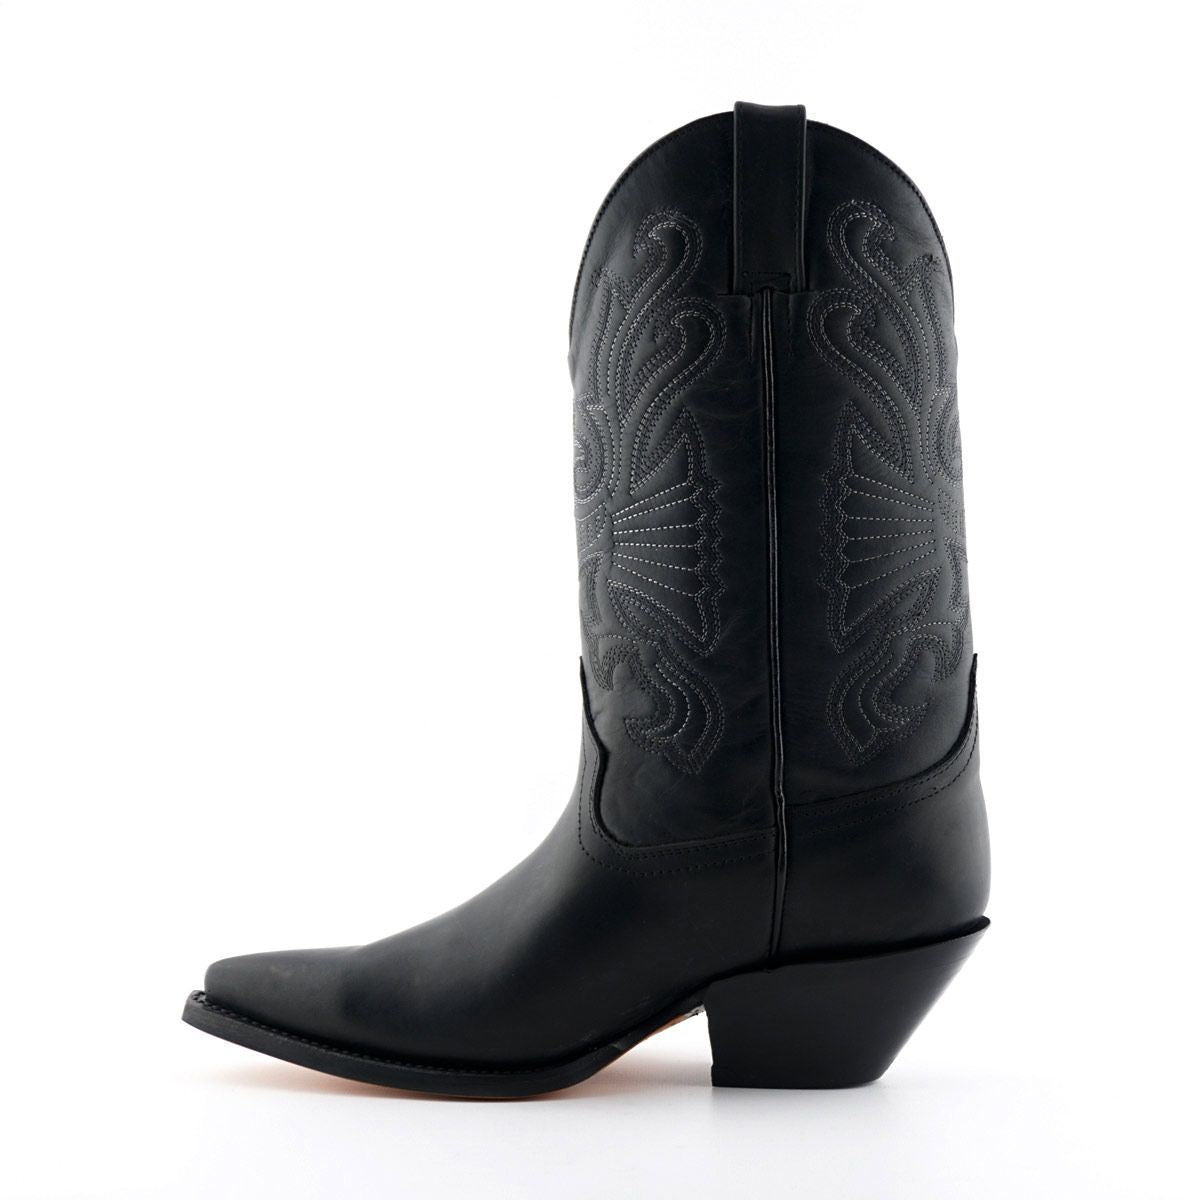 Grinders Black Leather Western Cowboy Boots-Buffalo - Upperclass Fashions 